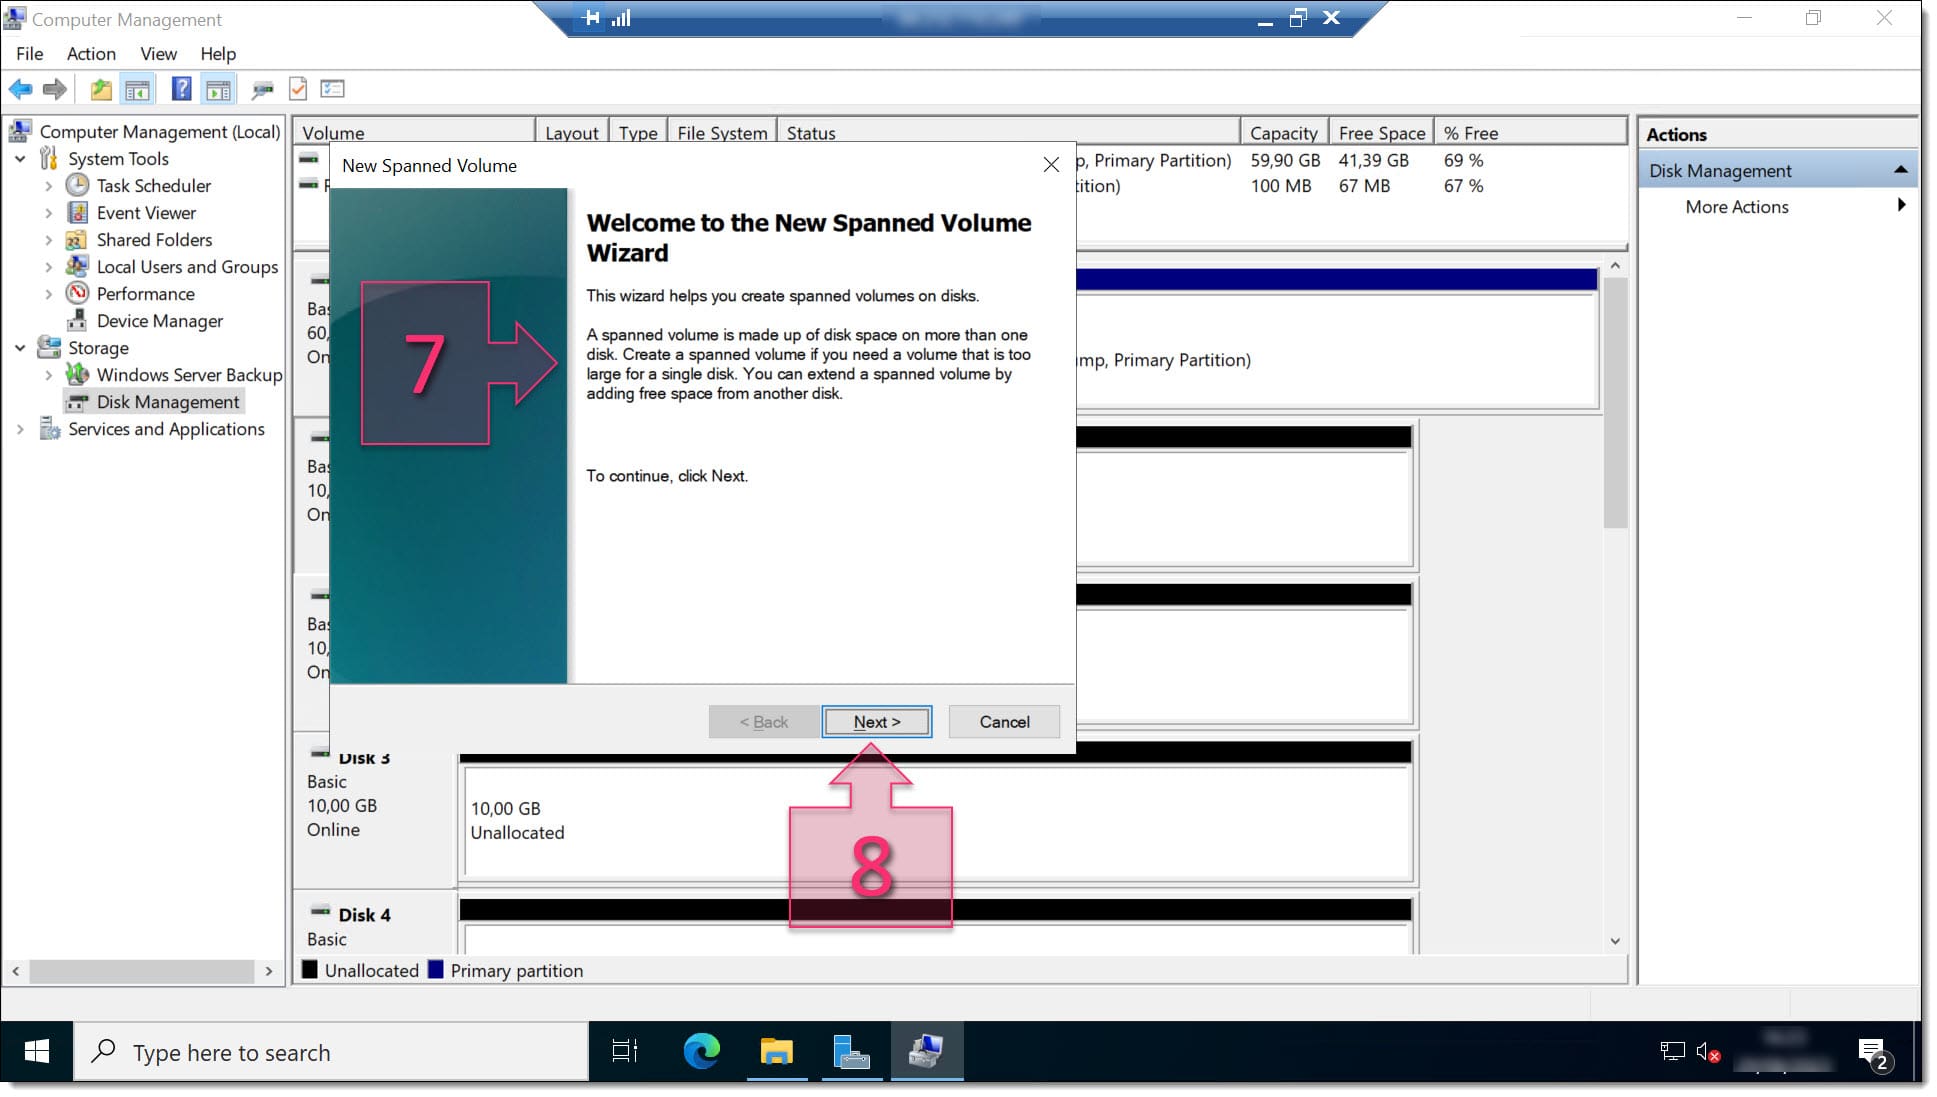 A screenshot of the introduction page of the New Spanned Volume Wizard